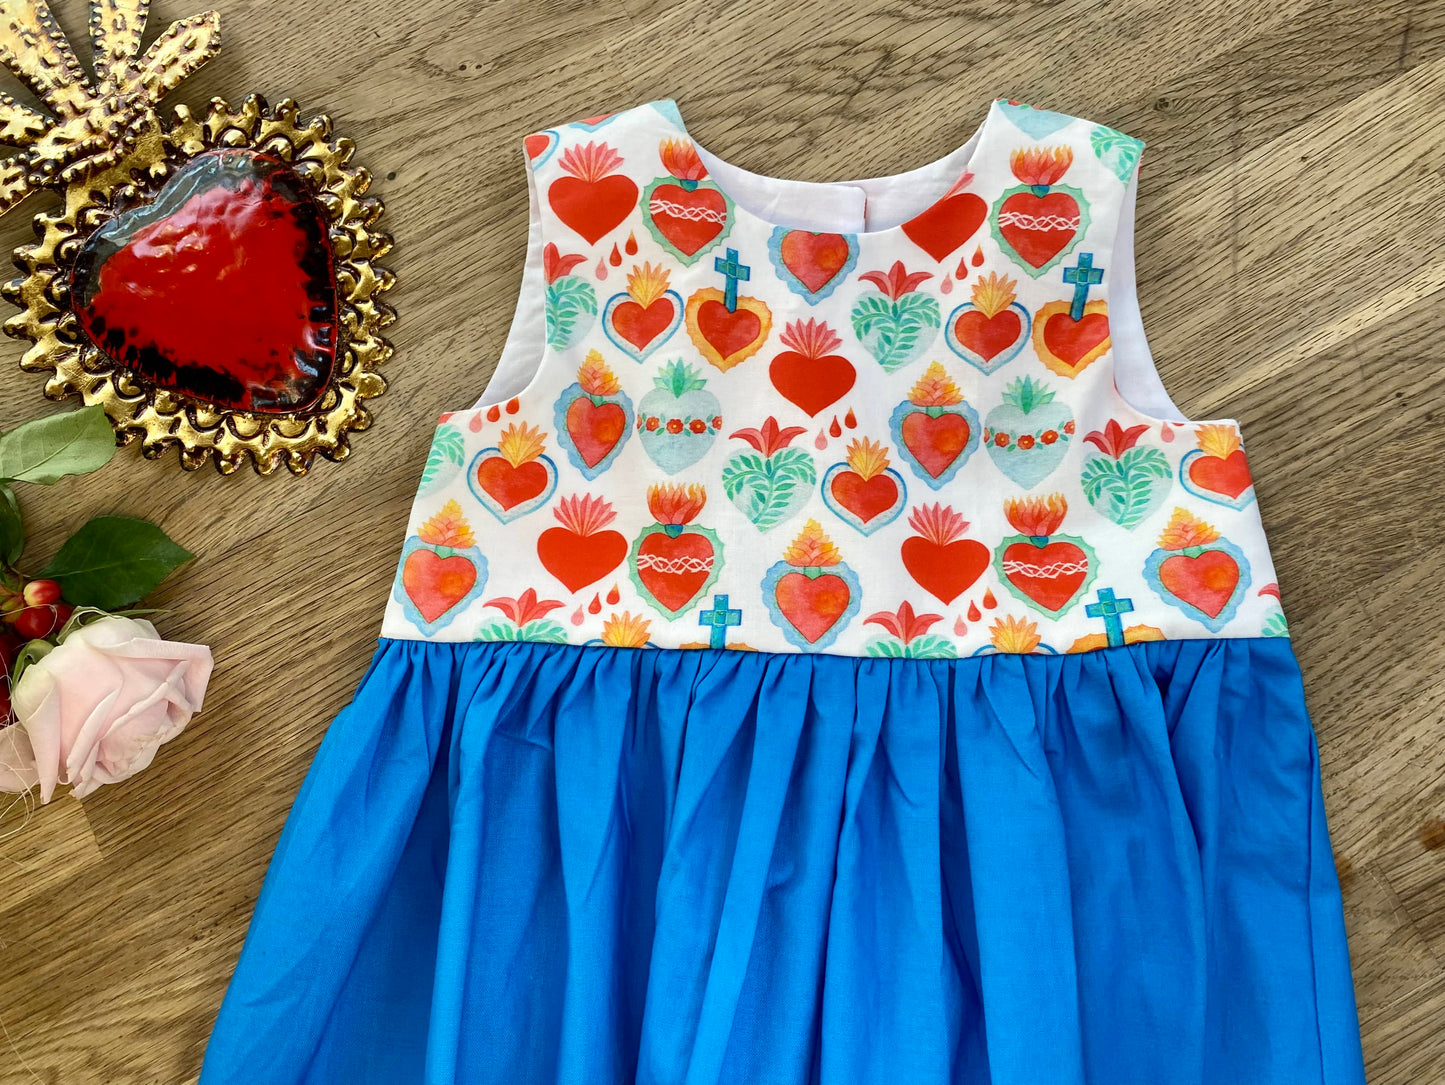 Blue Corazon Dress (NEW) Size 3t - Ready to Ship